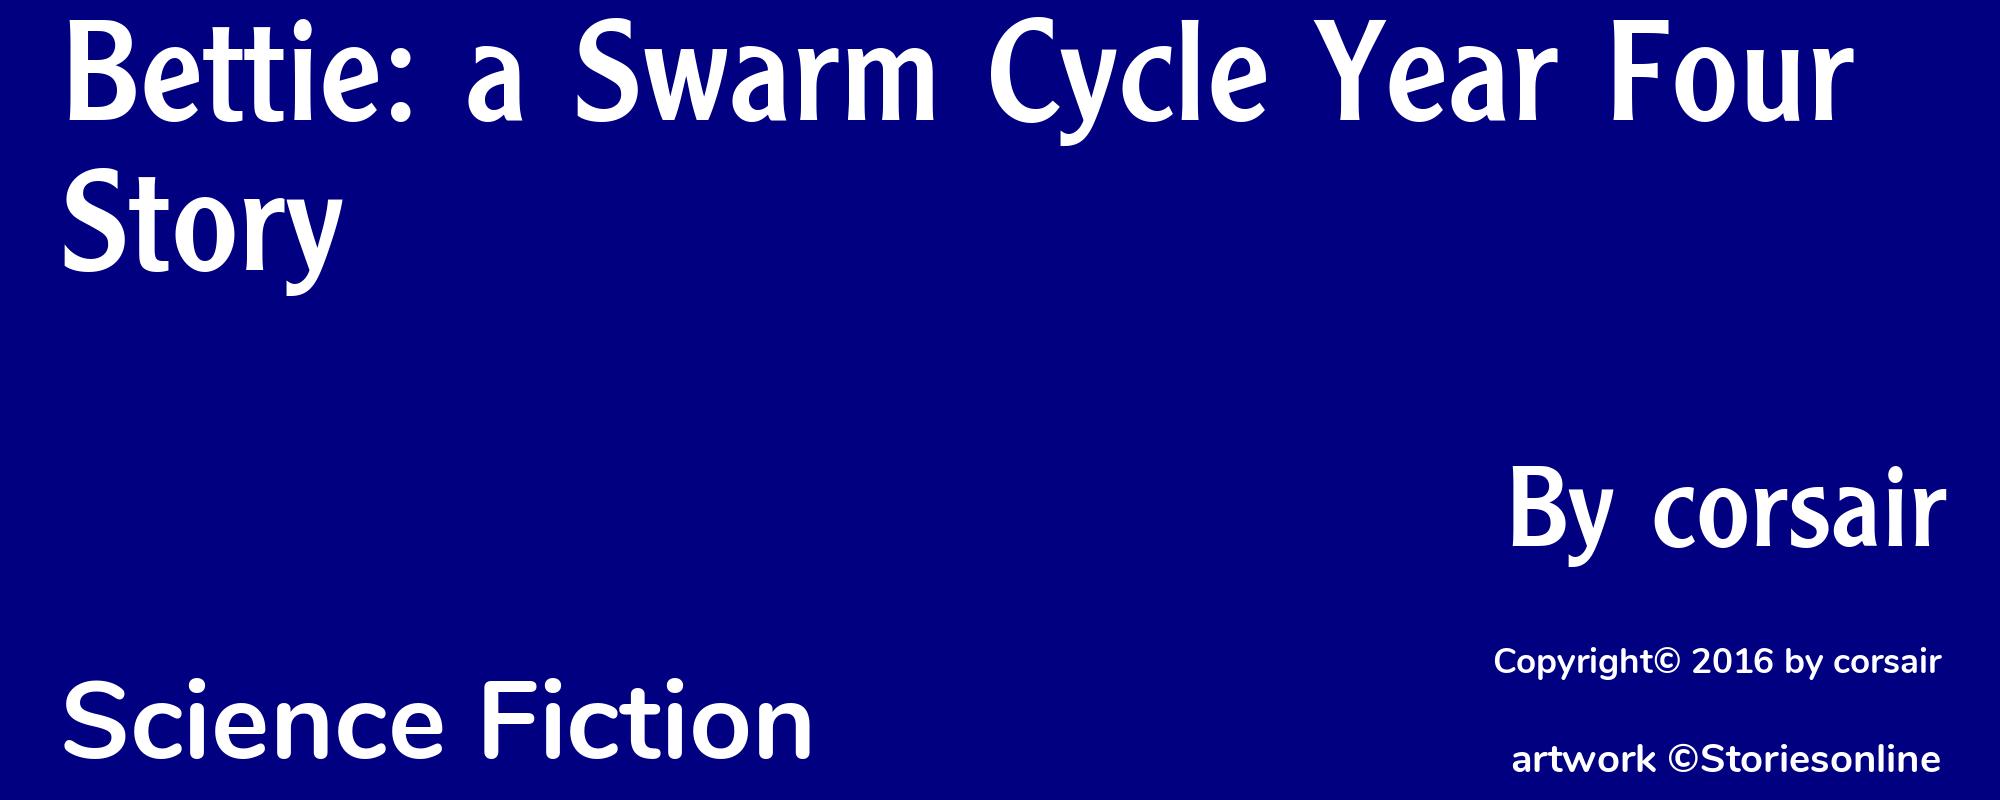 Bettie: a Swarm Cycle Year Four Story - Cover